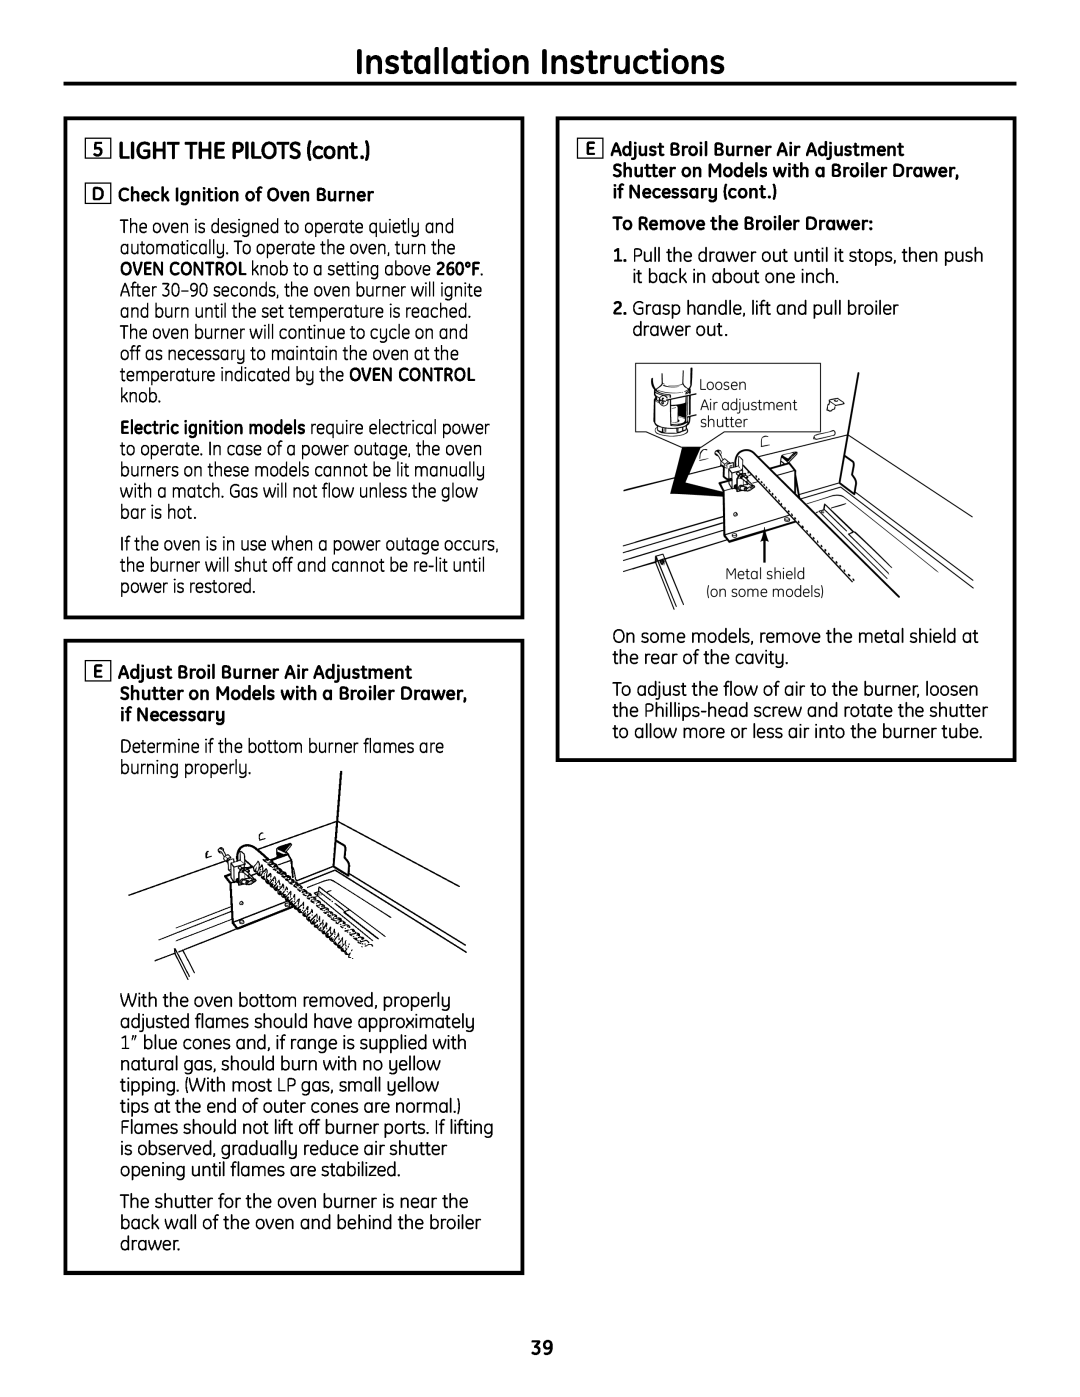 GE JGBS19 Installation Instructions, LIGHT THE PILOTS cont, D Check Ignition of Oven Burner, To Remove the Broiler Drawer 